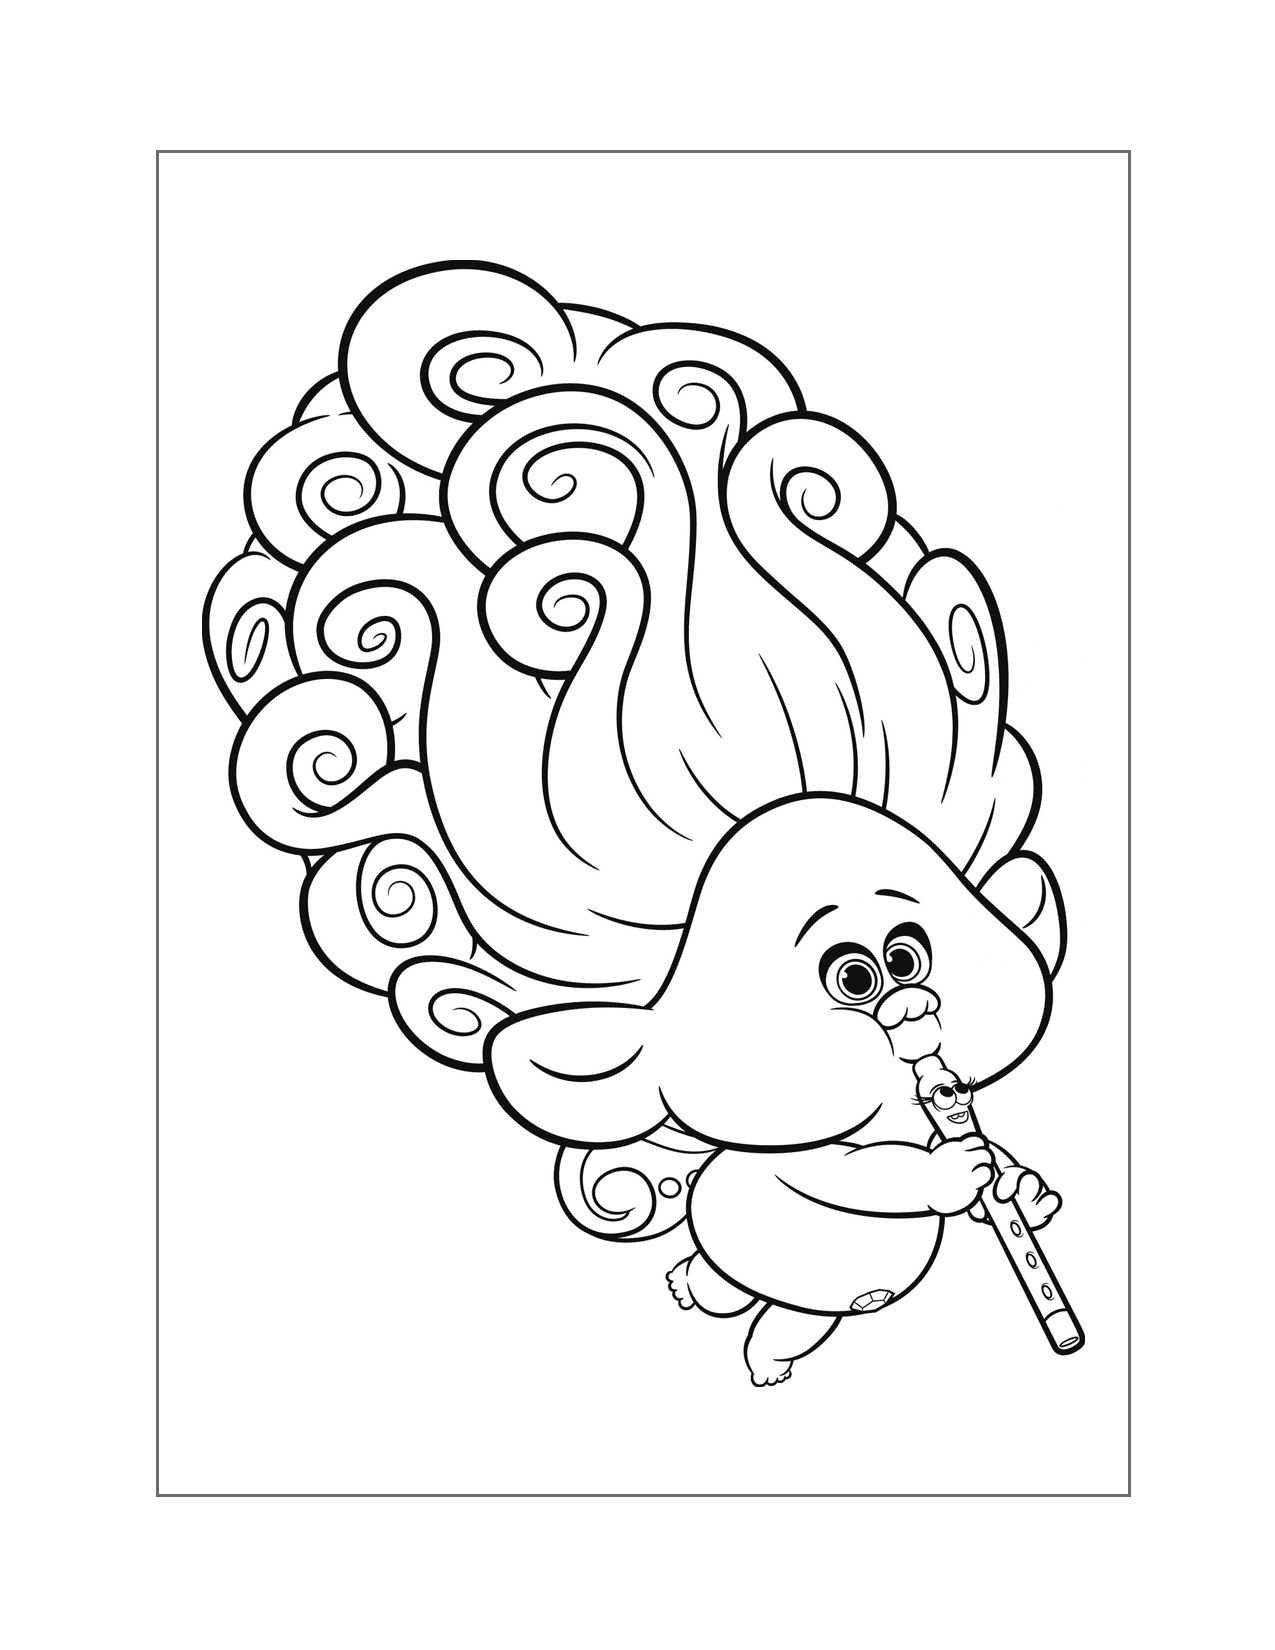 Classical Troll Coloring Page